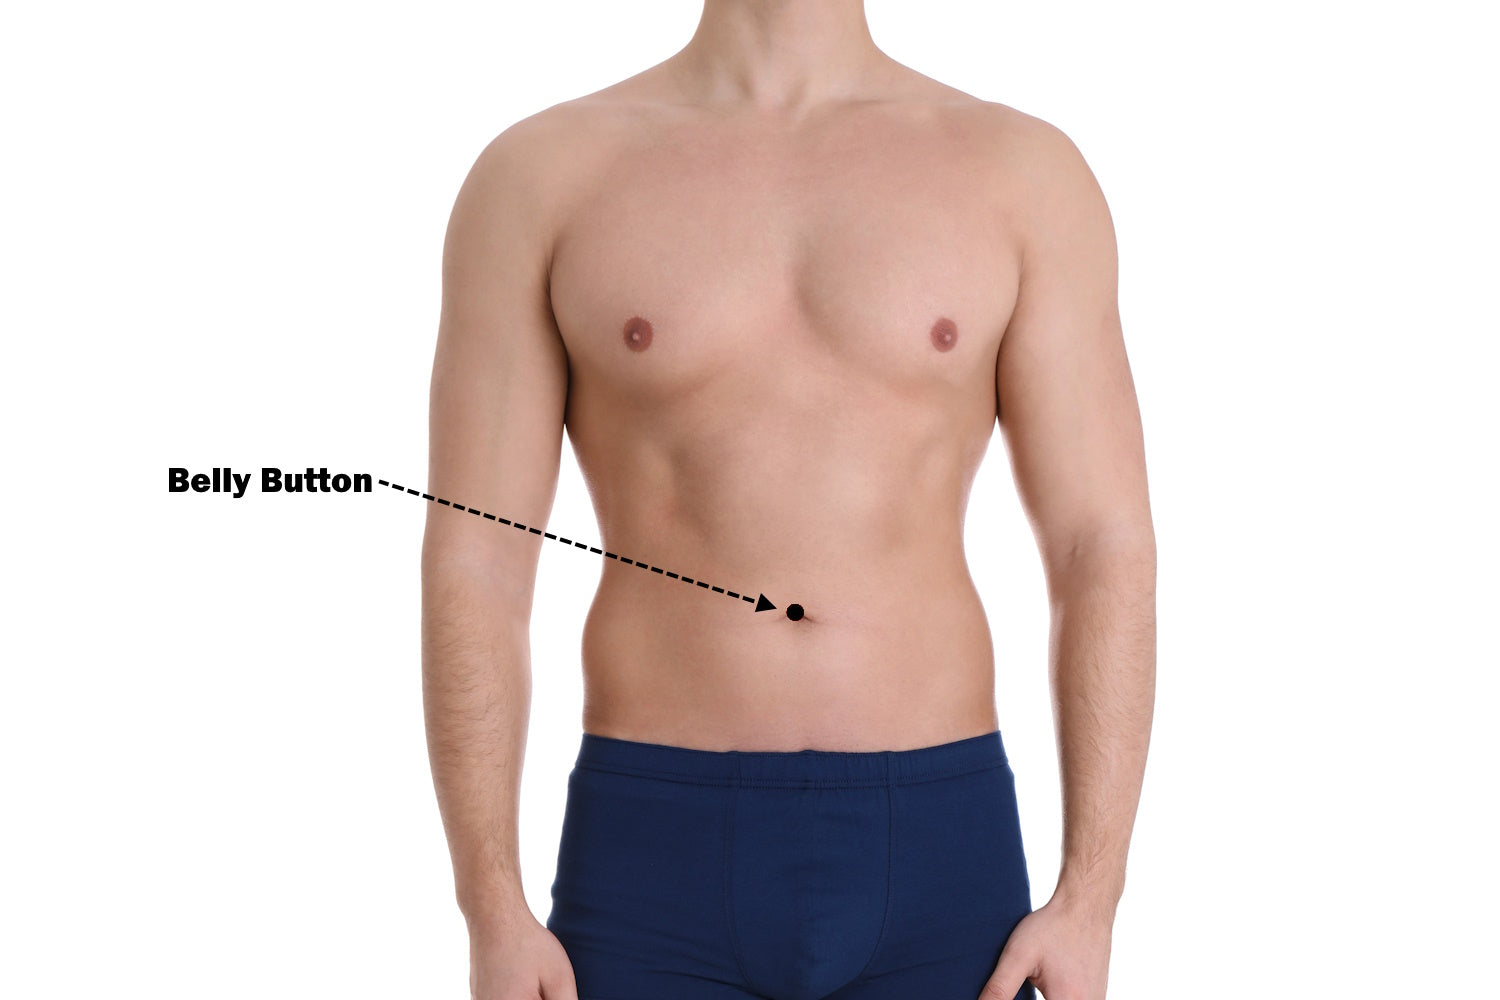 A photo of a man with the location of a belly button piercing pointed out by an arrow.